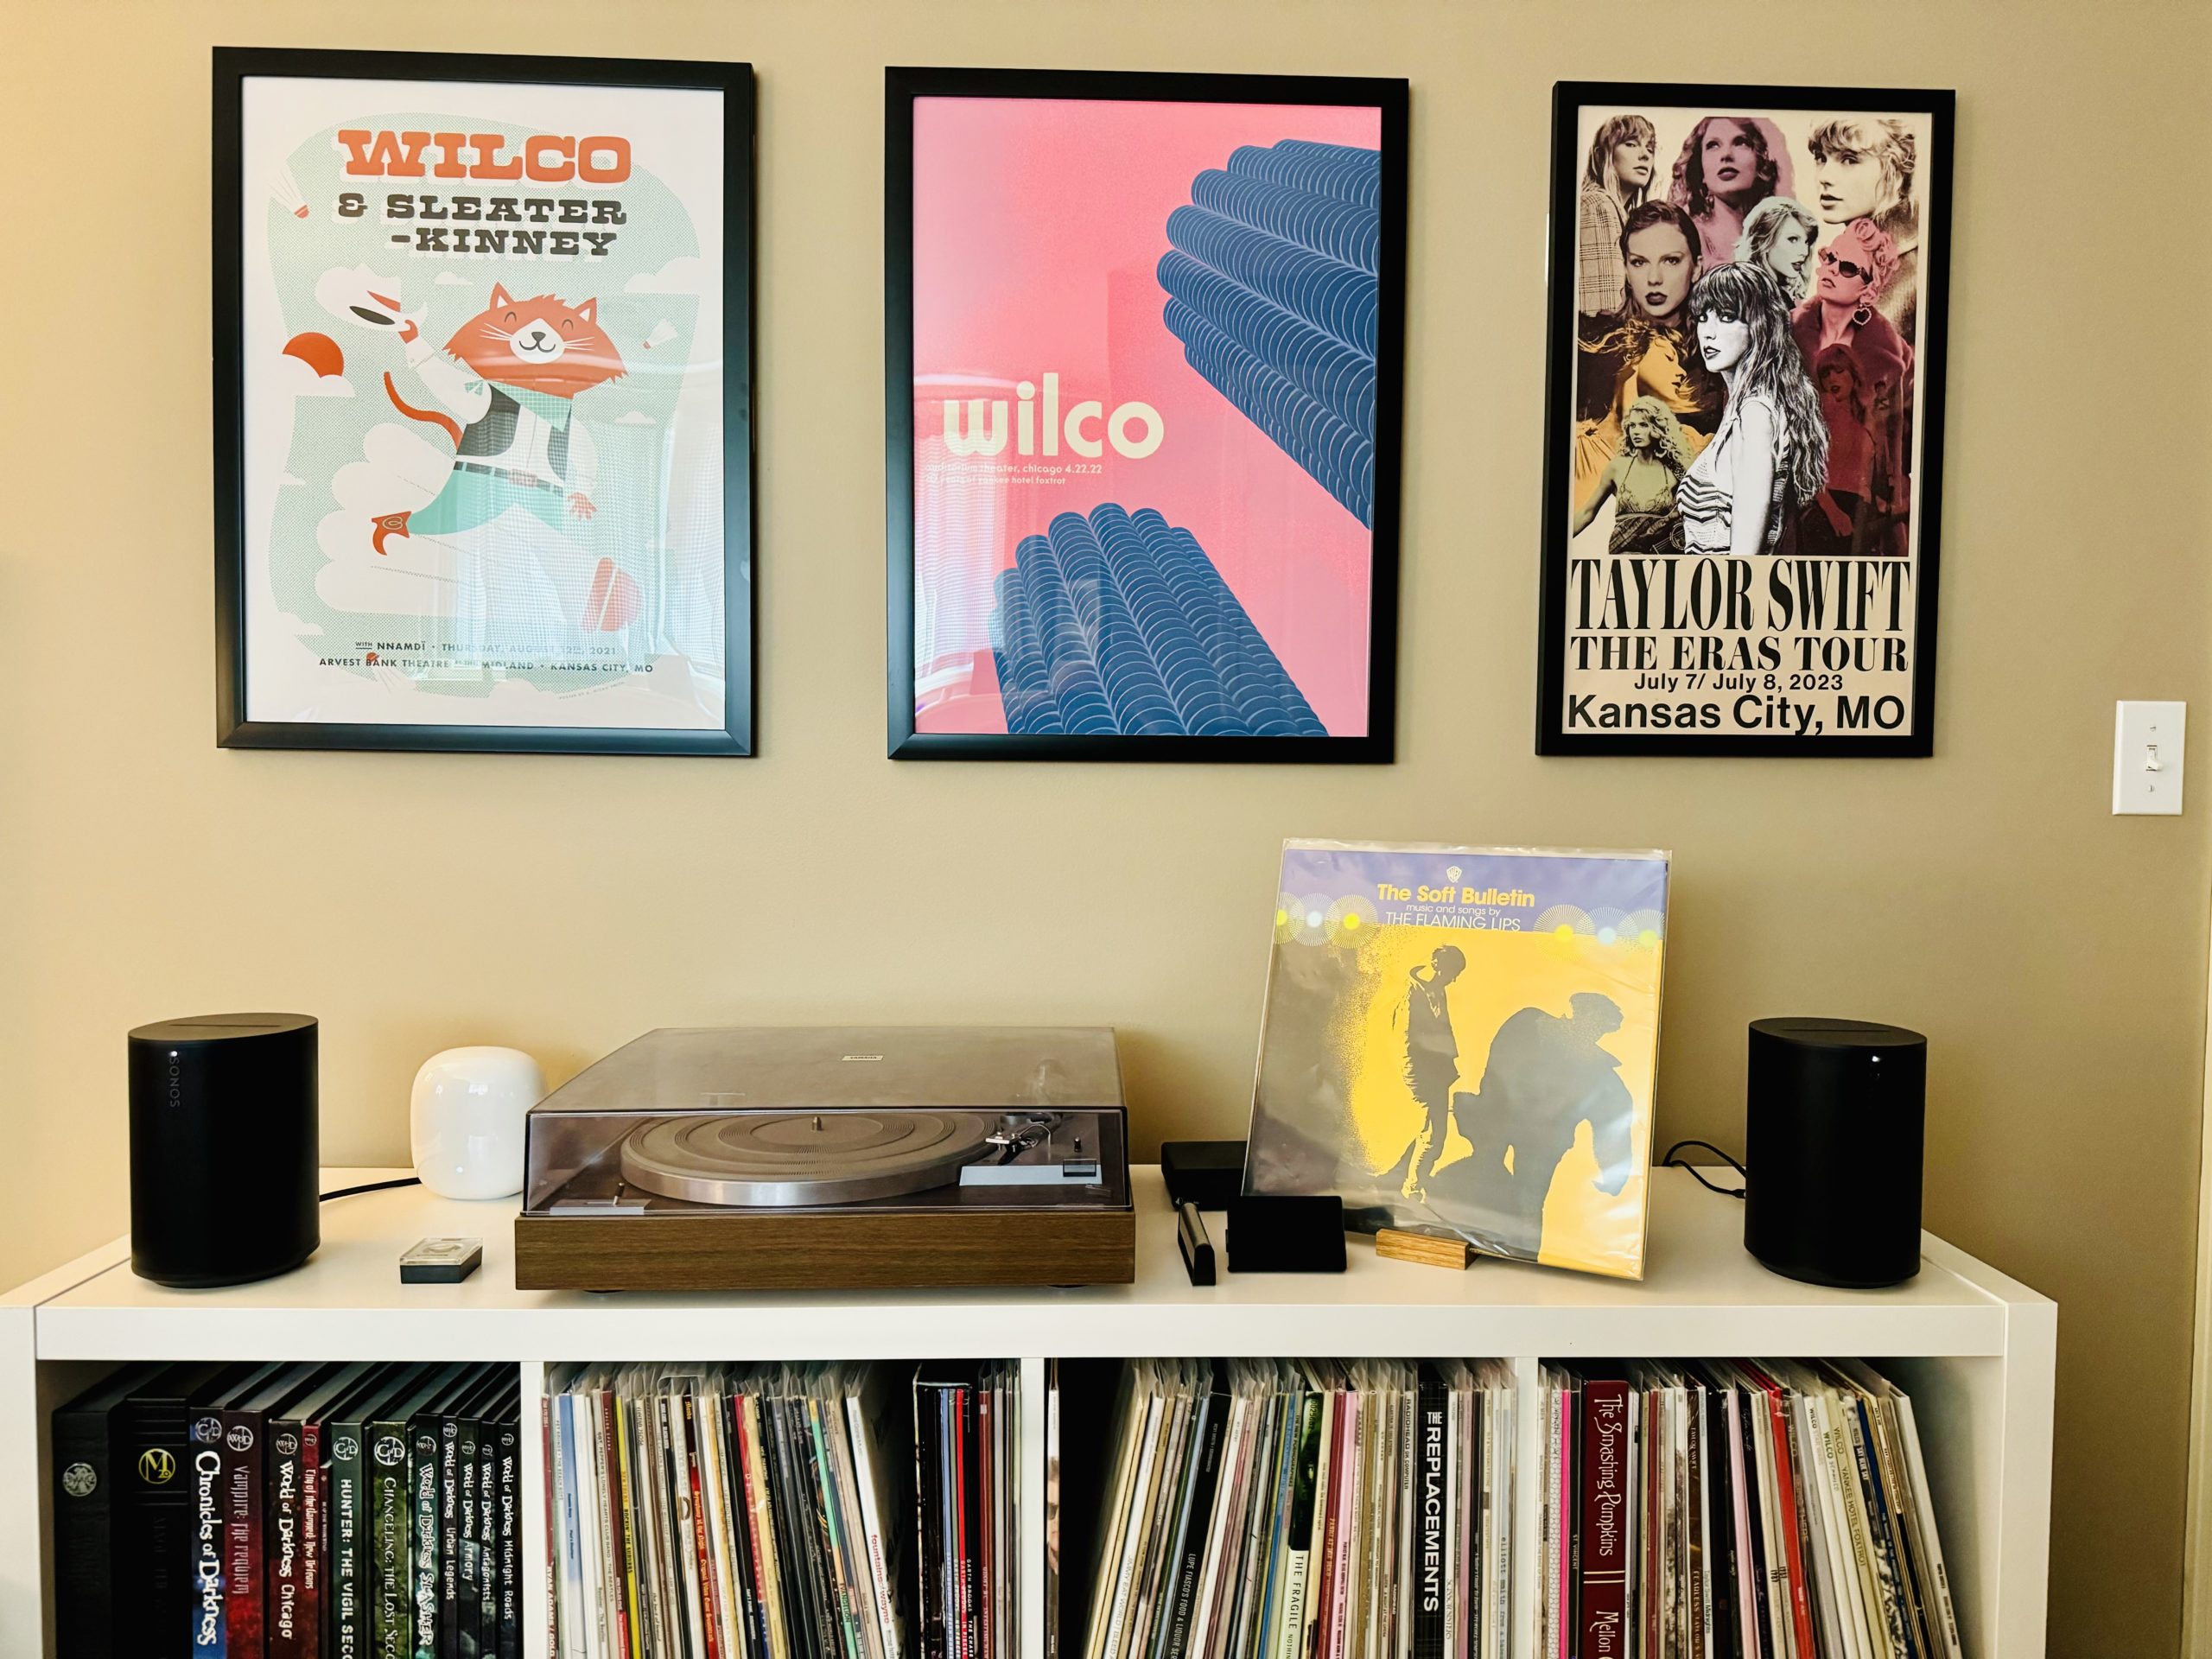 Switching to Sonos: A Brief Review